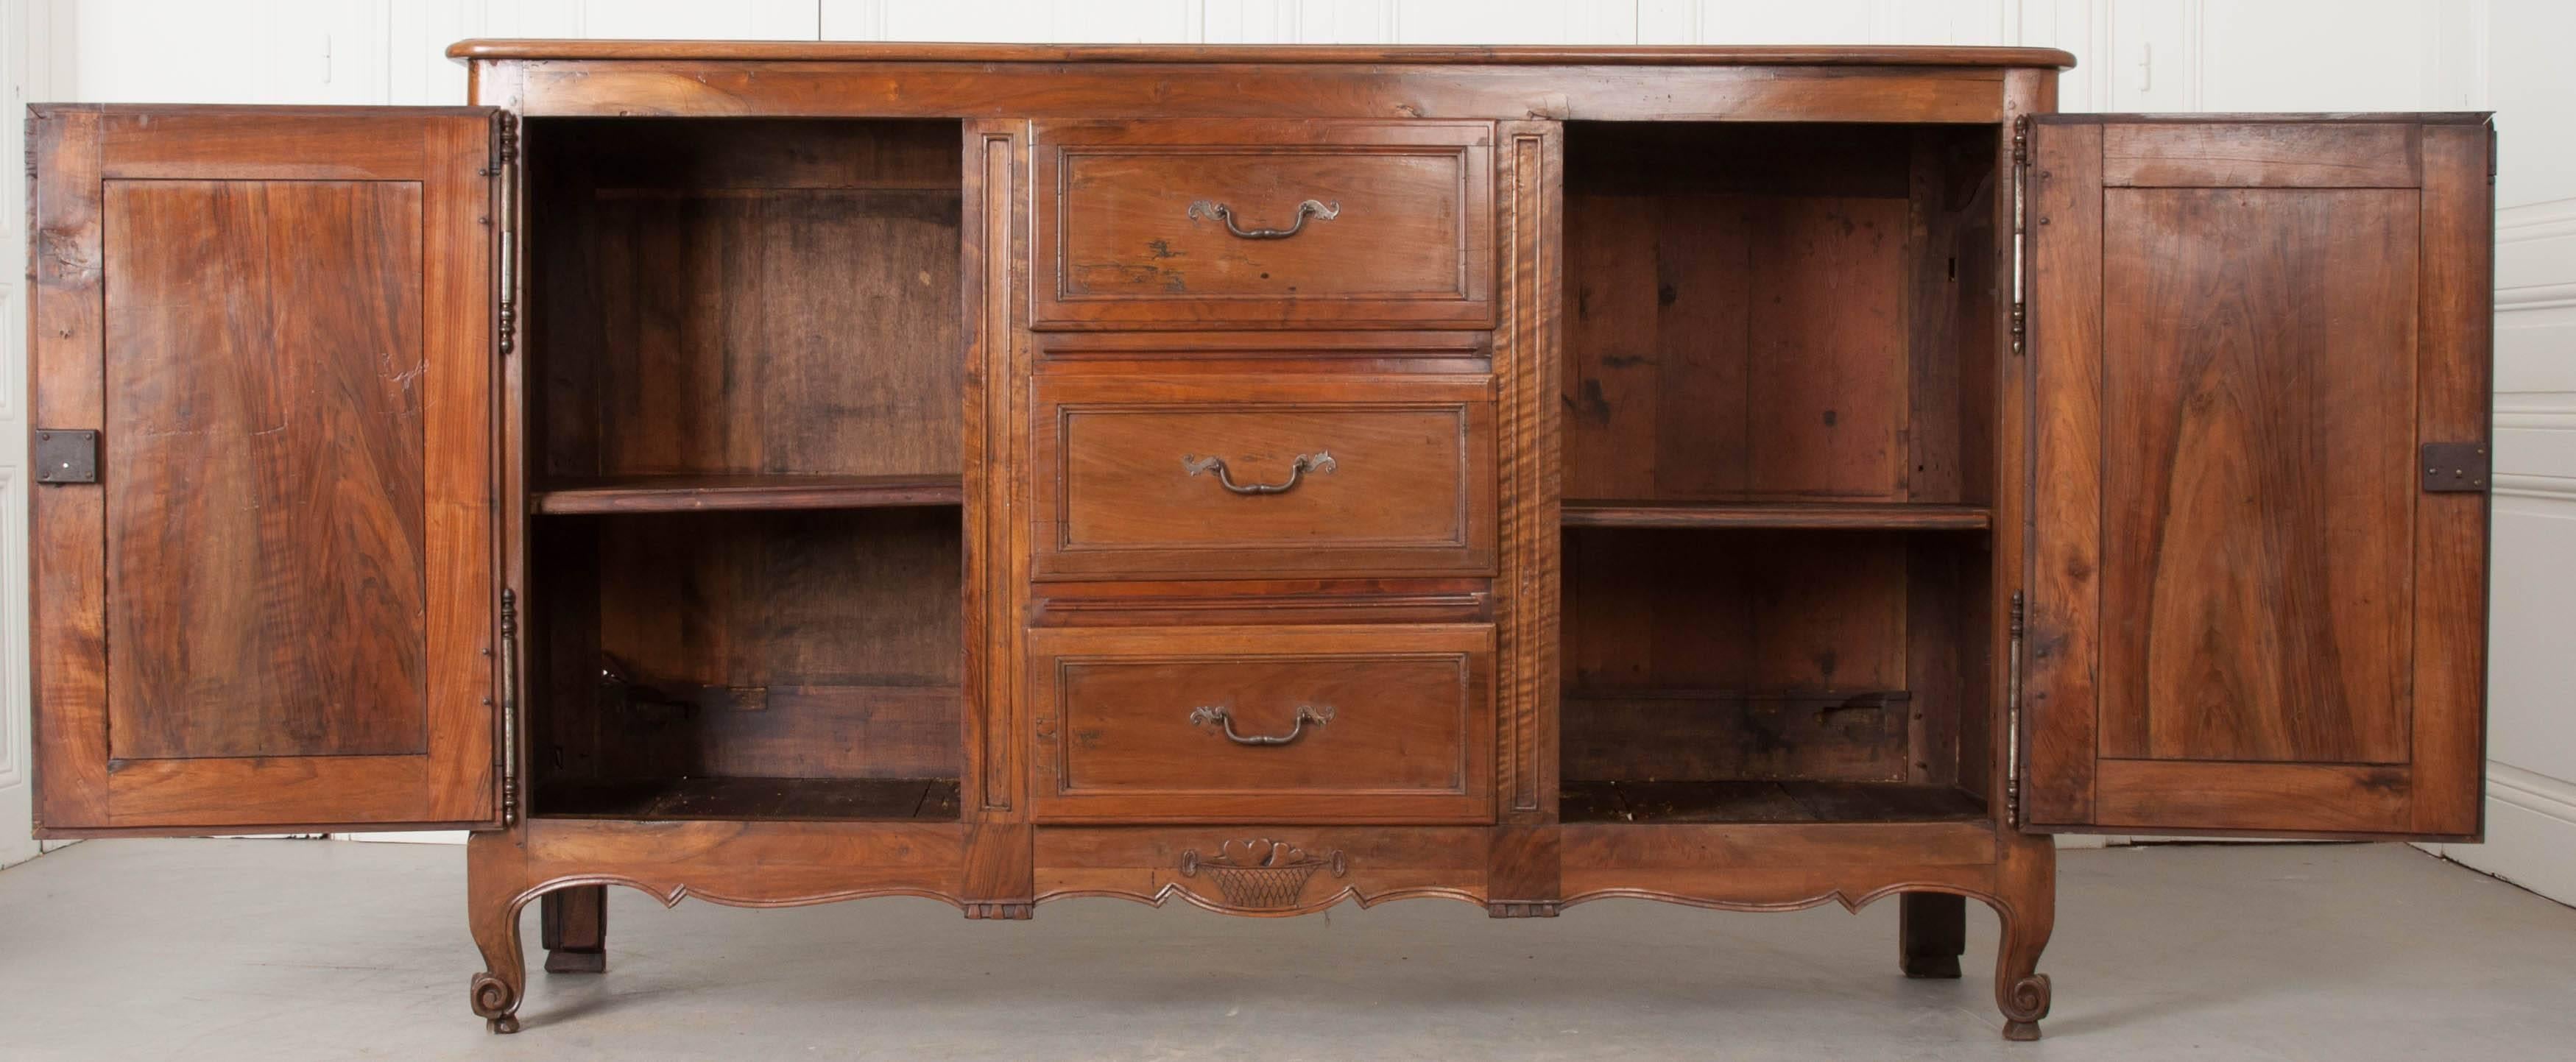 A fantastic French 19th century cherry enfilade with three drawers found between its two doors. The cherry is beautifully toned with a rich warm color. Elements of both Louis XV and Provincial styles are present in this transitional antique. The top